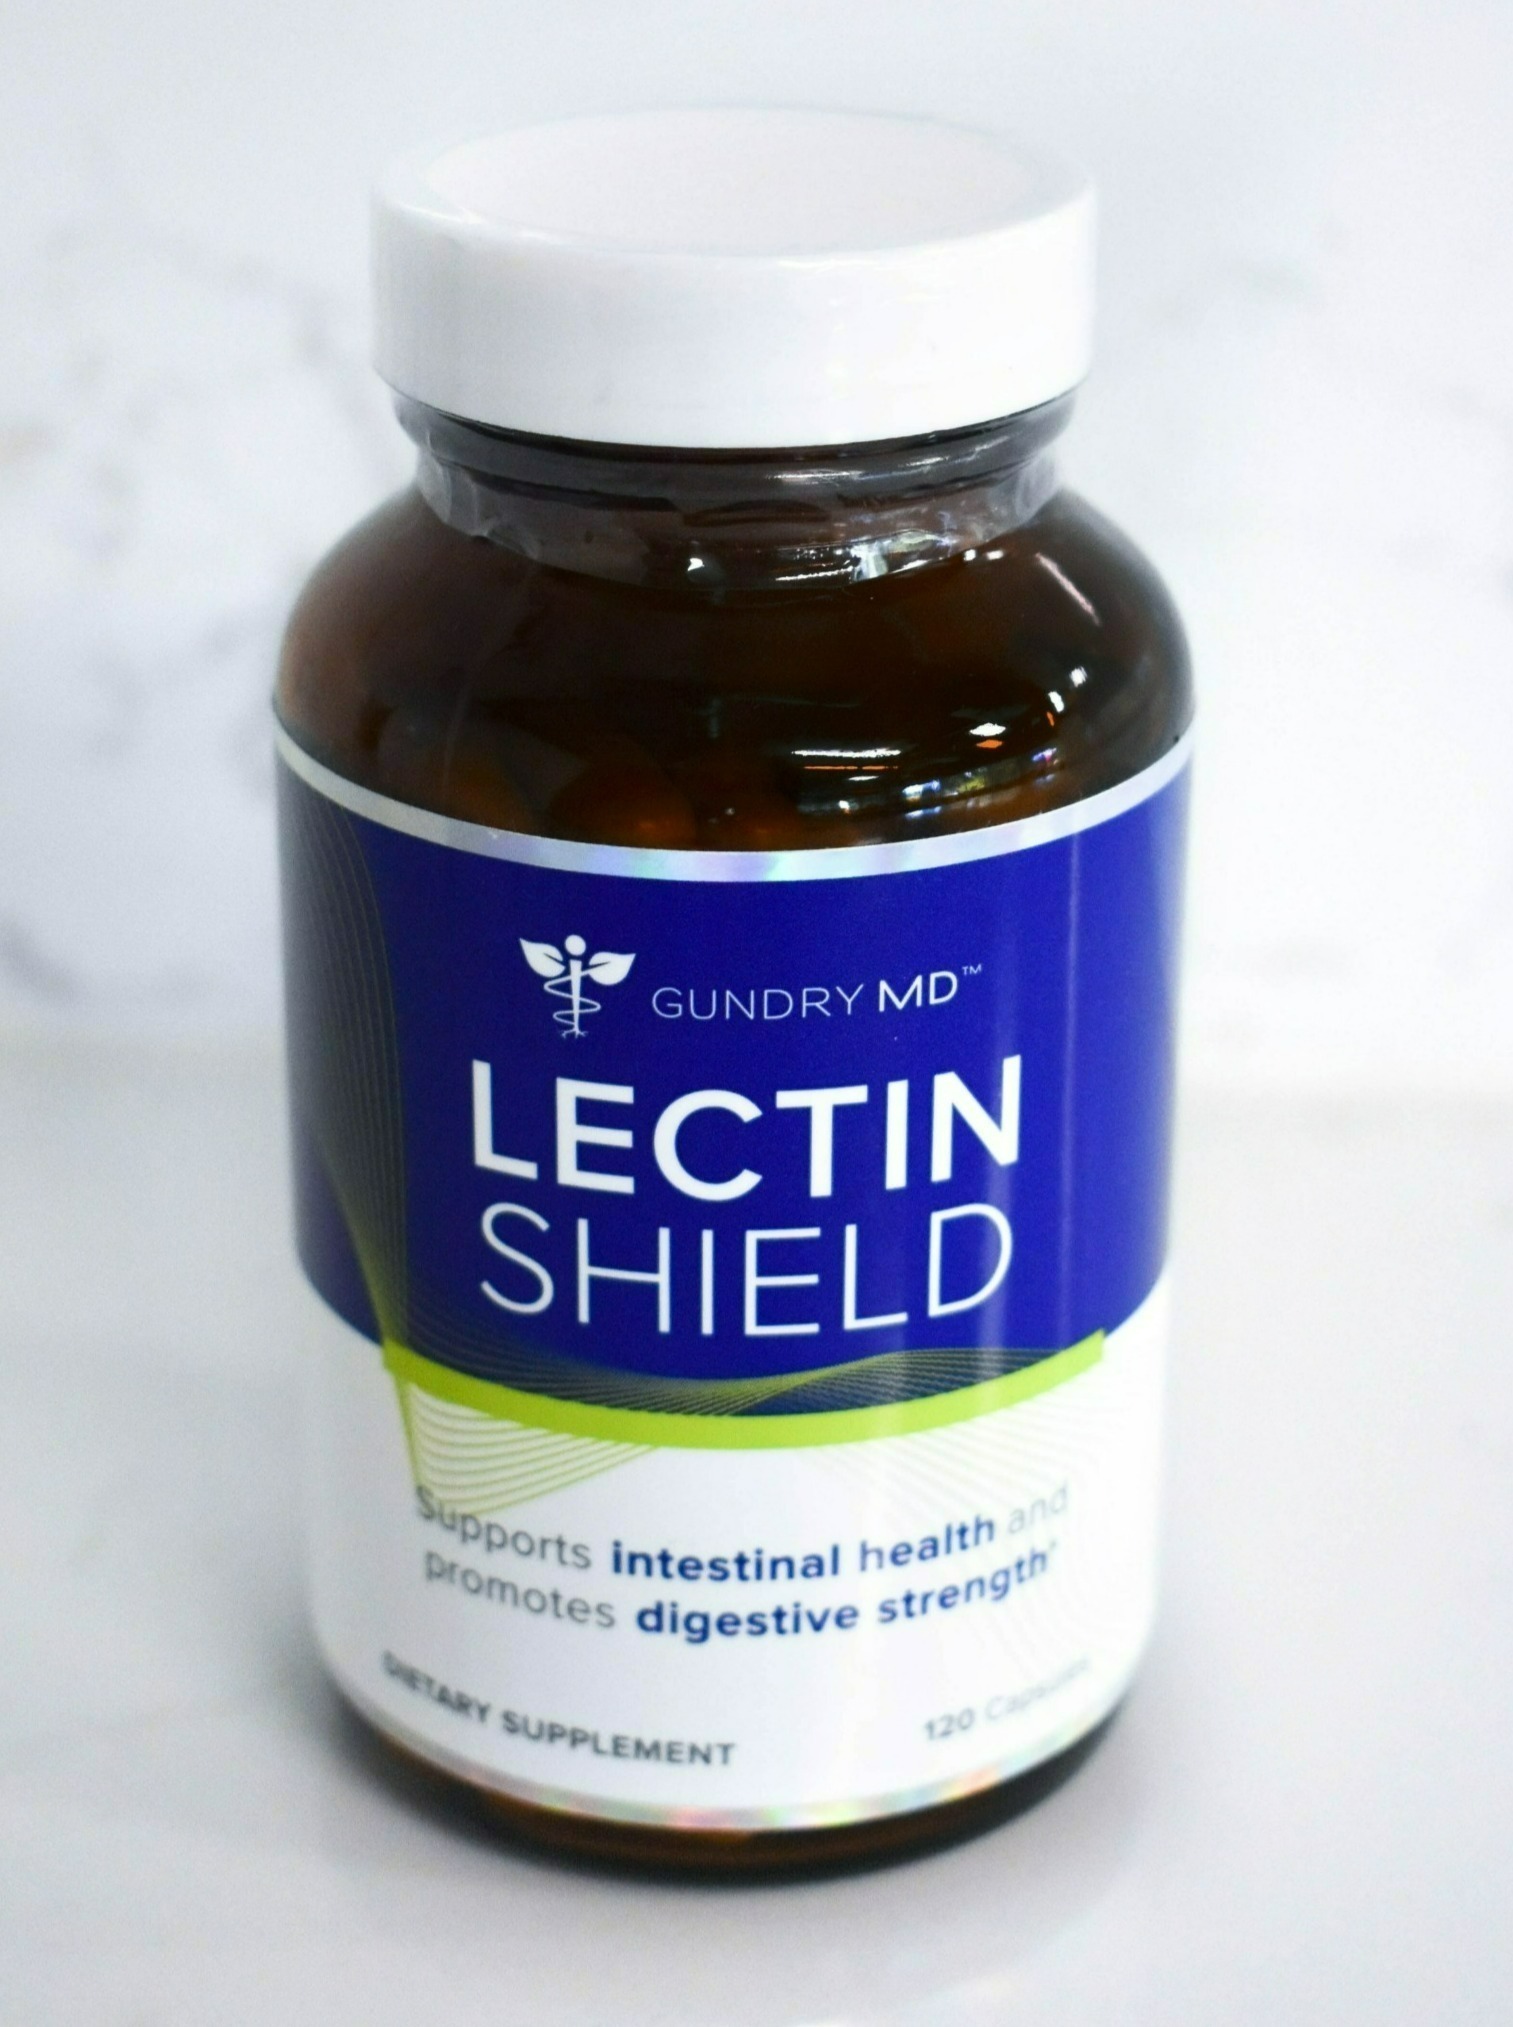 Container of Lectin Shield - a formula that is designed to neutralize the harmful effects of lectins